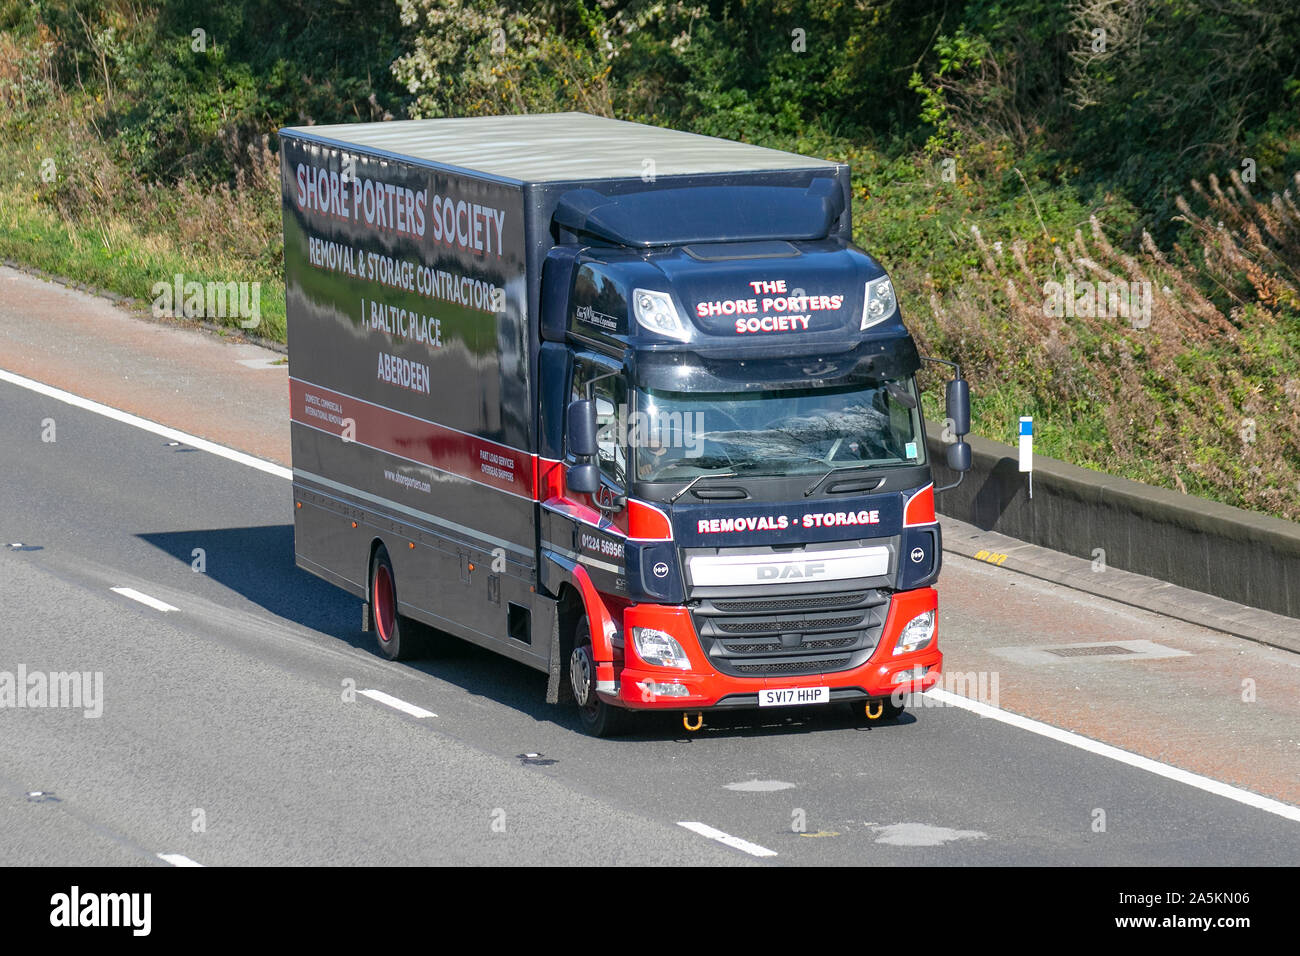 The Shore Porters Society Aberdeen; Haulage delivery trucks, haulage, lorry, transportation, truck, cargo, DAF CF vehicle, delivery, transport, industry, supply chain freight, on the M6 at Lancaster, UK Stock Photo